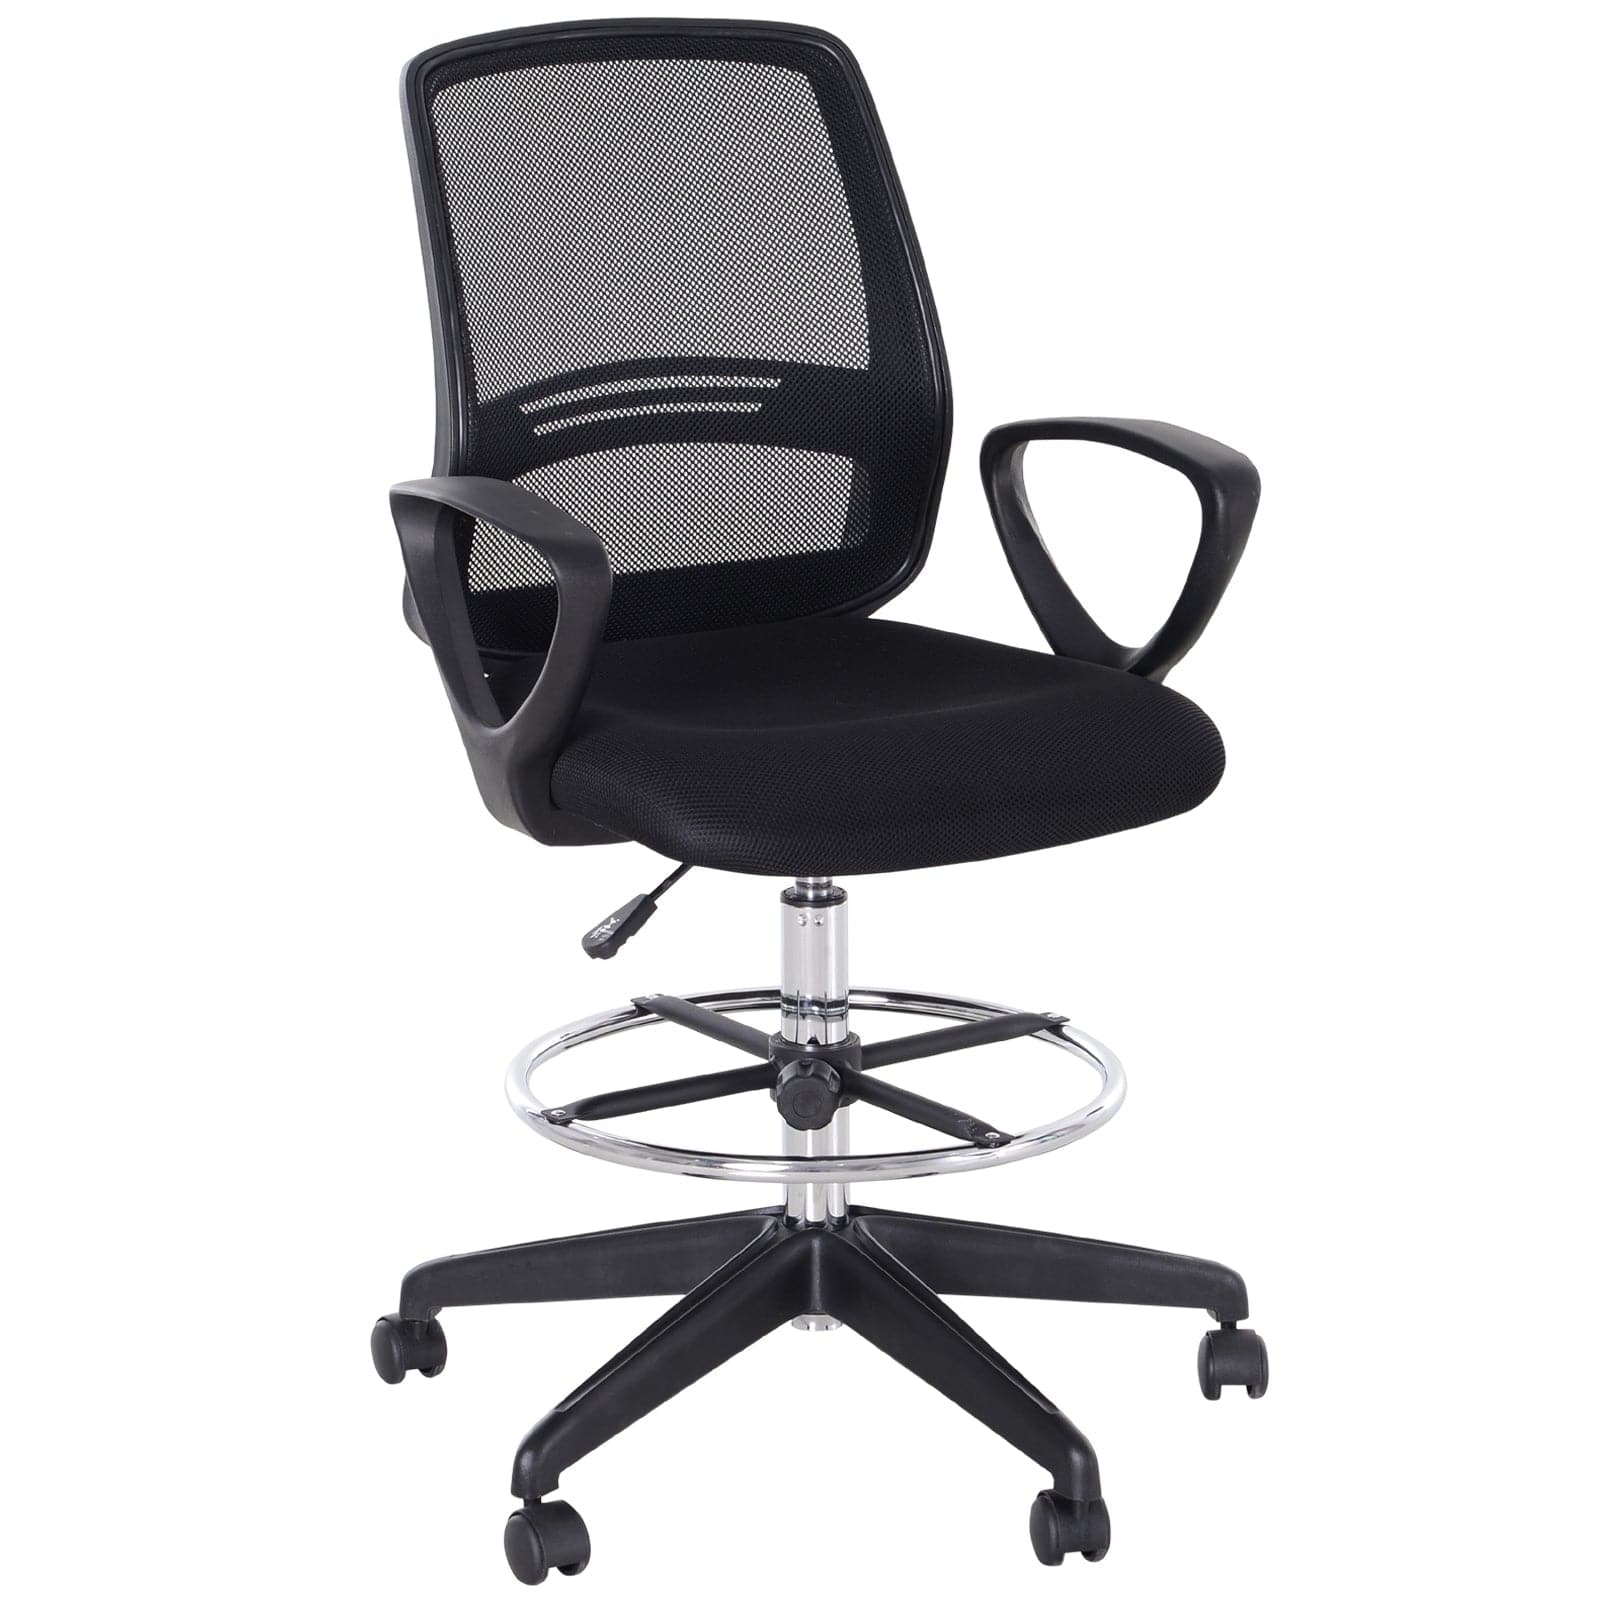 ProperAV Extra Tall Ergonomic Back Office Chair with Adjustable Height Footrest and 360deg Swivel - Black